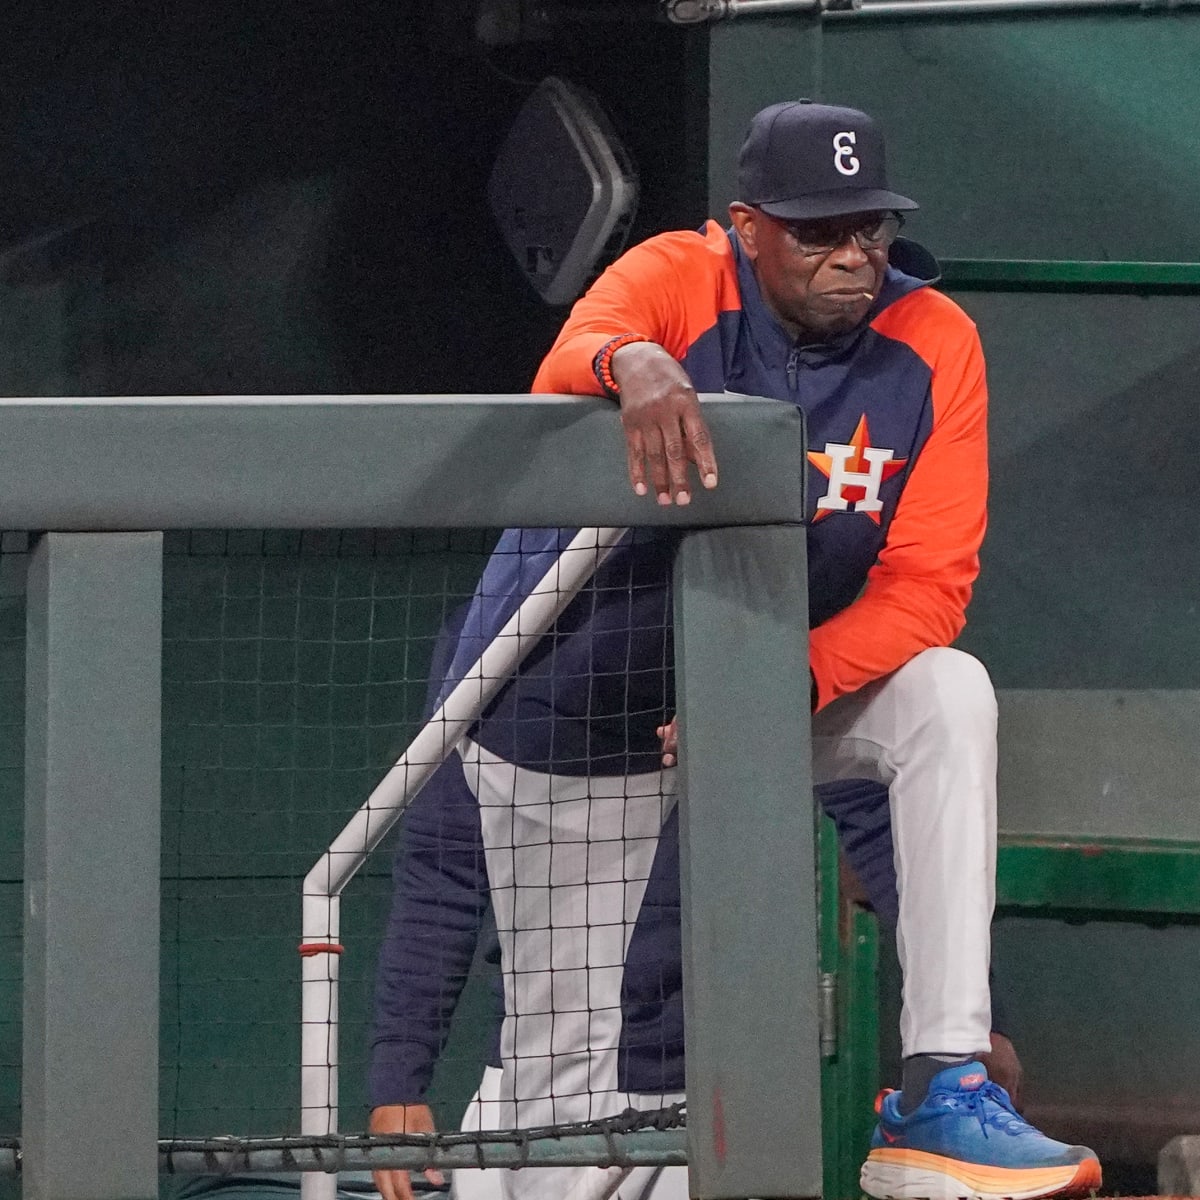 Dusty Baker's return to baseball is great for the Astros, and for MLB 